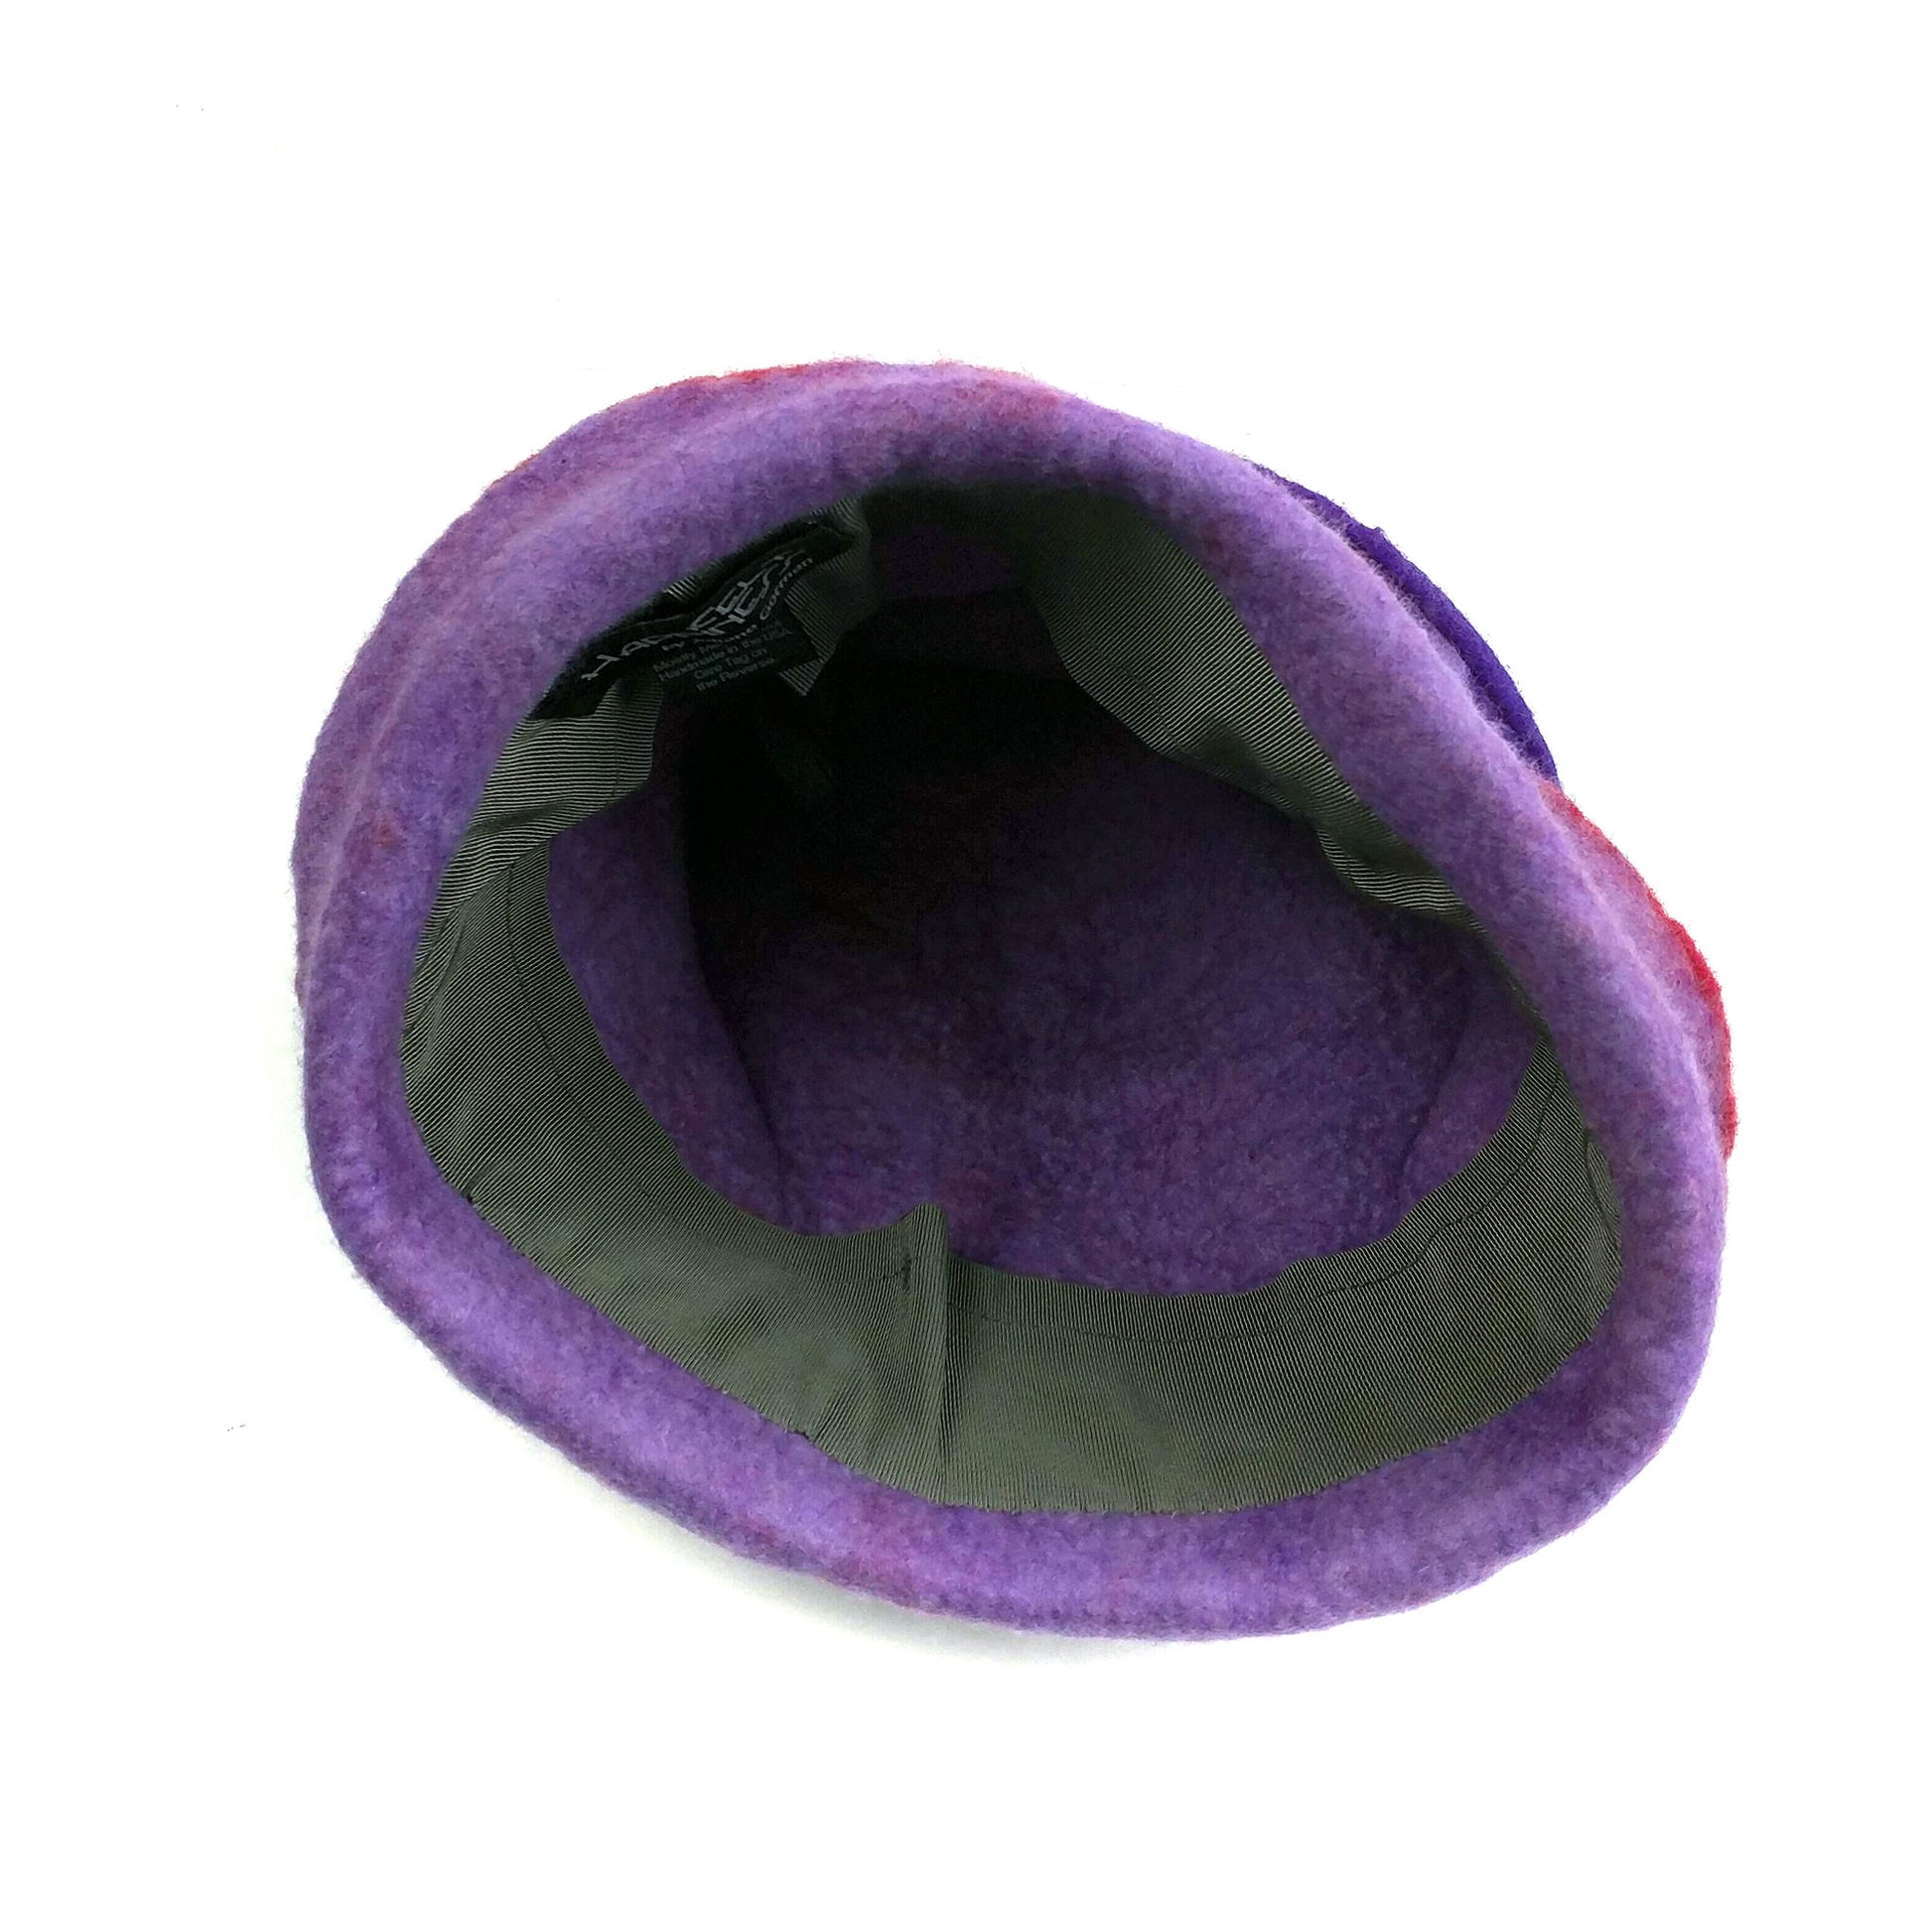 Fun, Sculptural, Purple and Red Felted Hat - inside view